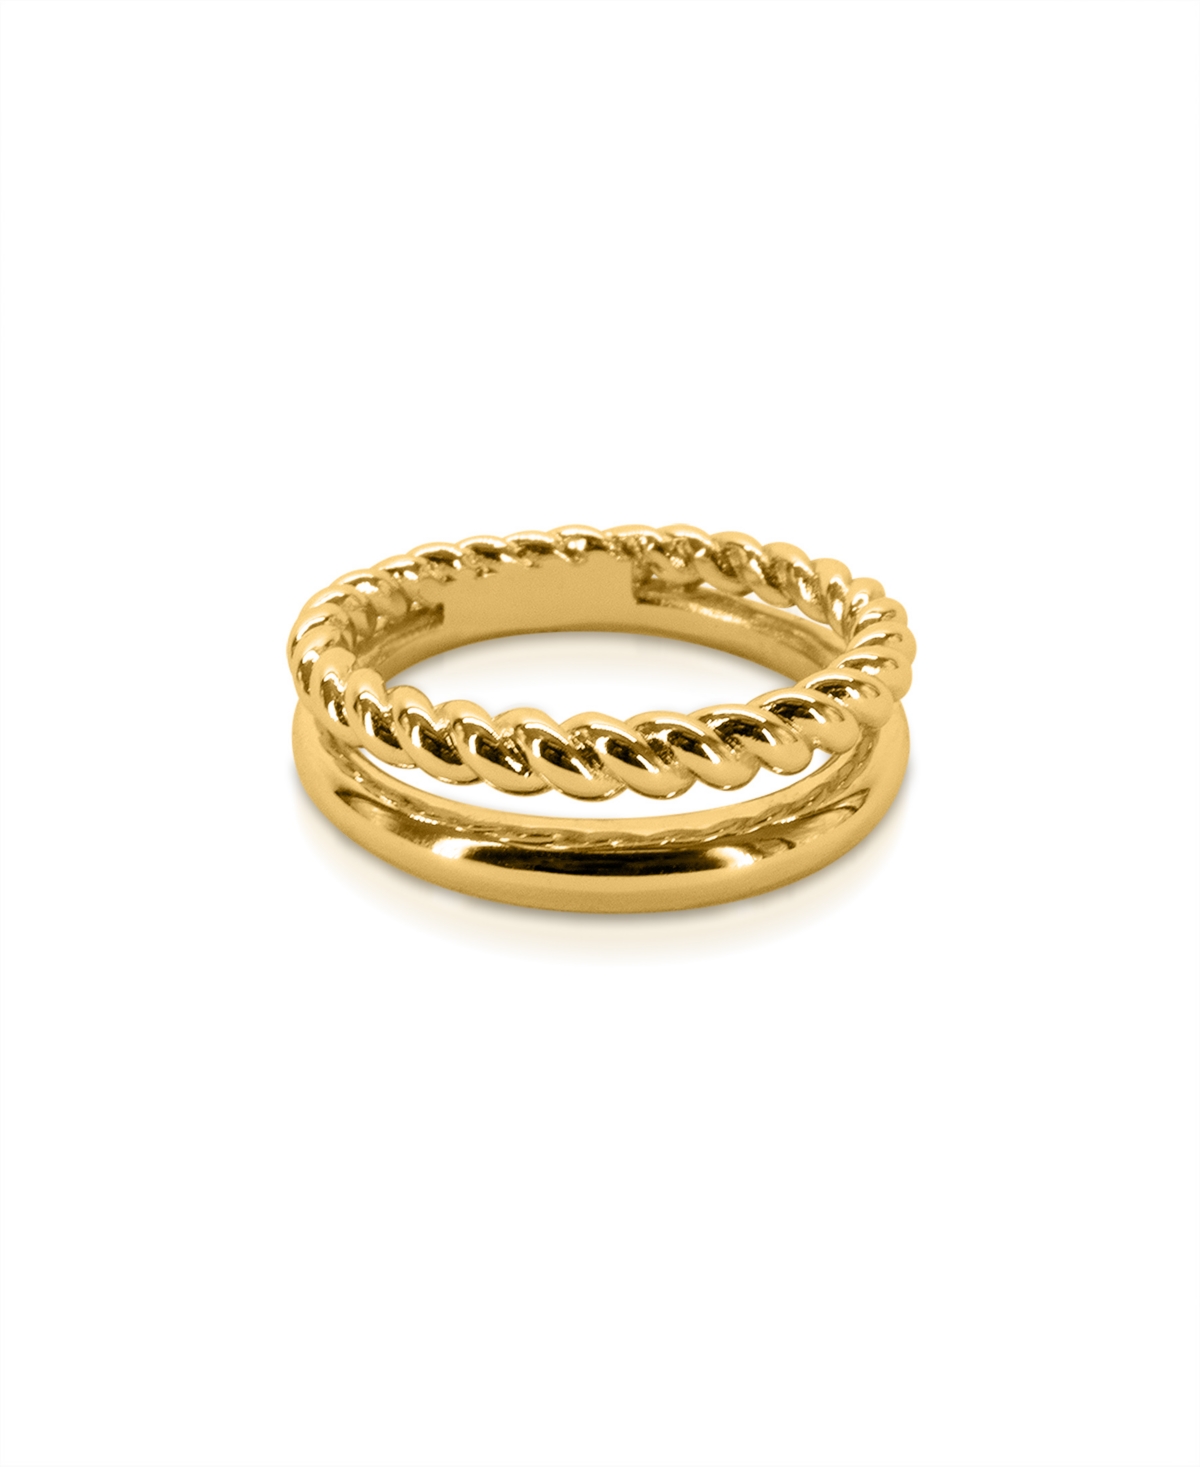 Pheonix Ring in 18k Gold- Plated Brass - Gold-Tone